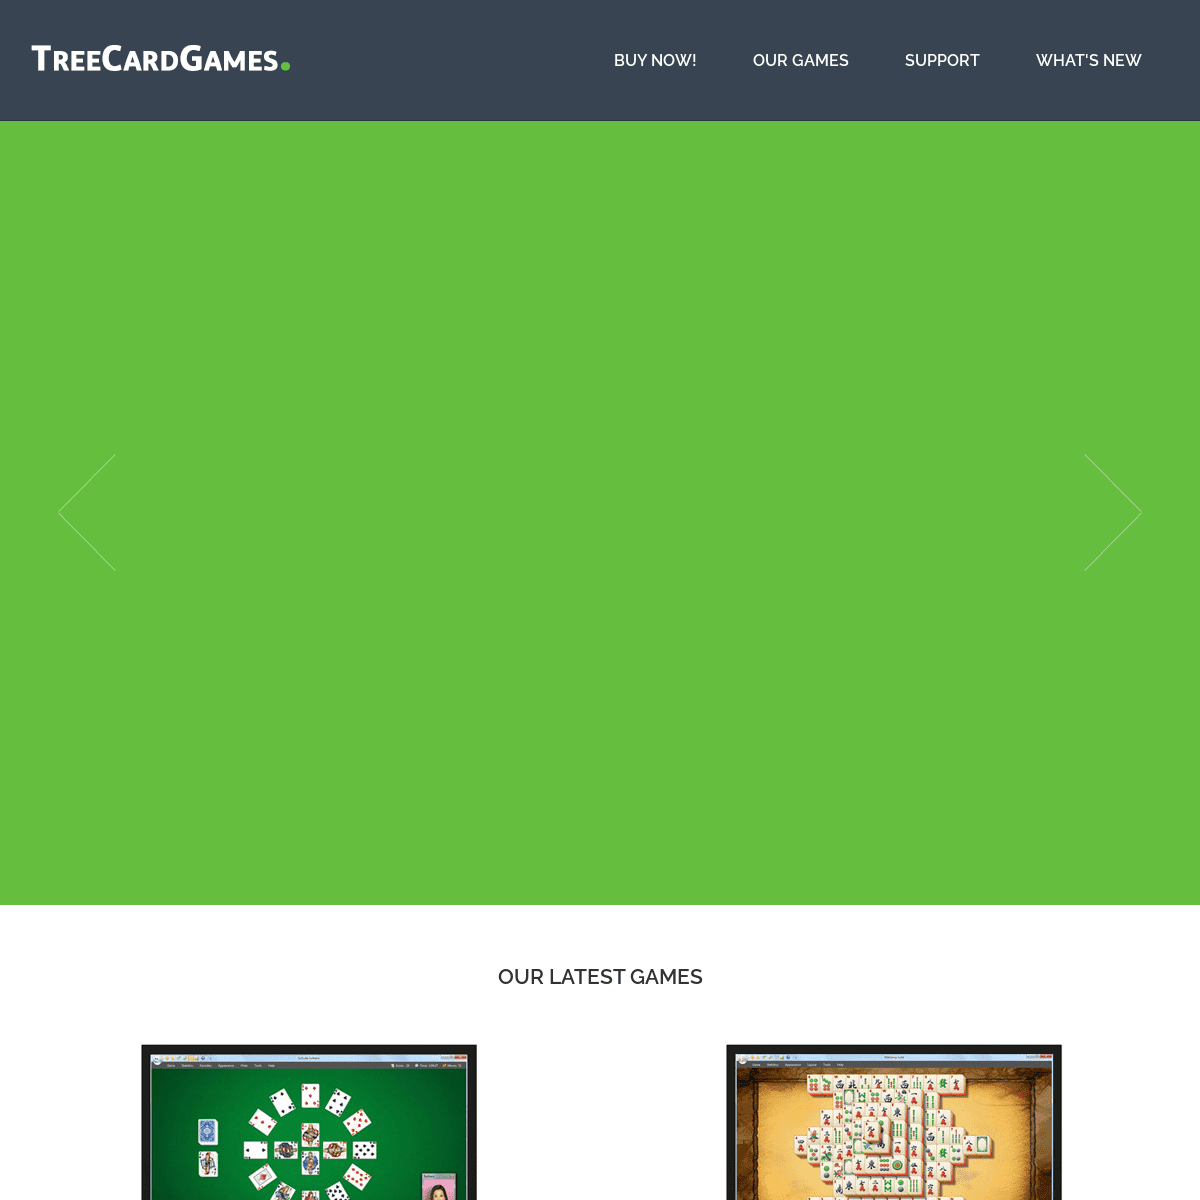 A complete backup of https://treecardgames.com